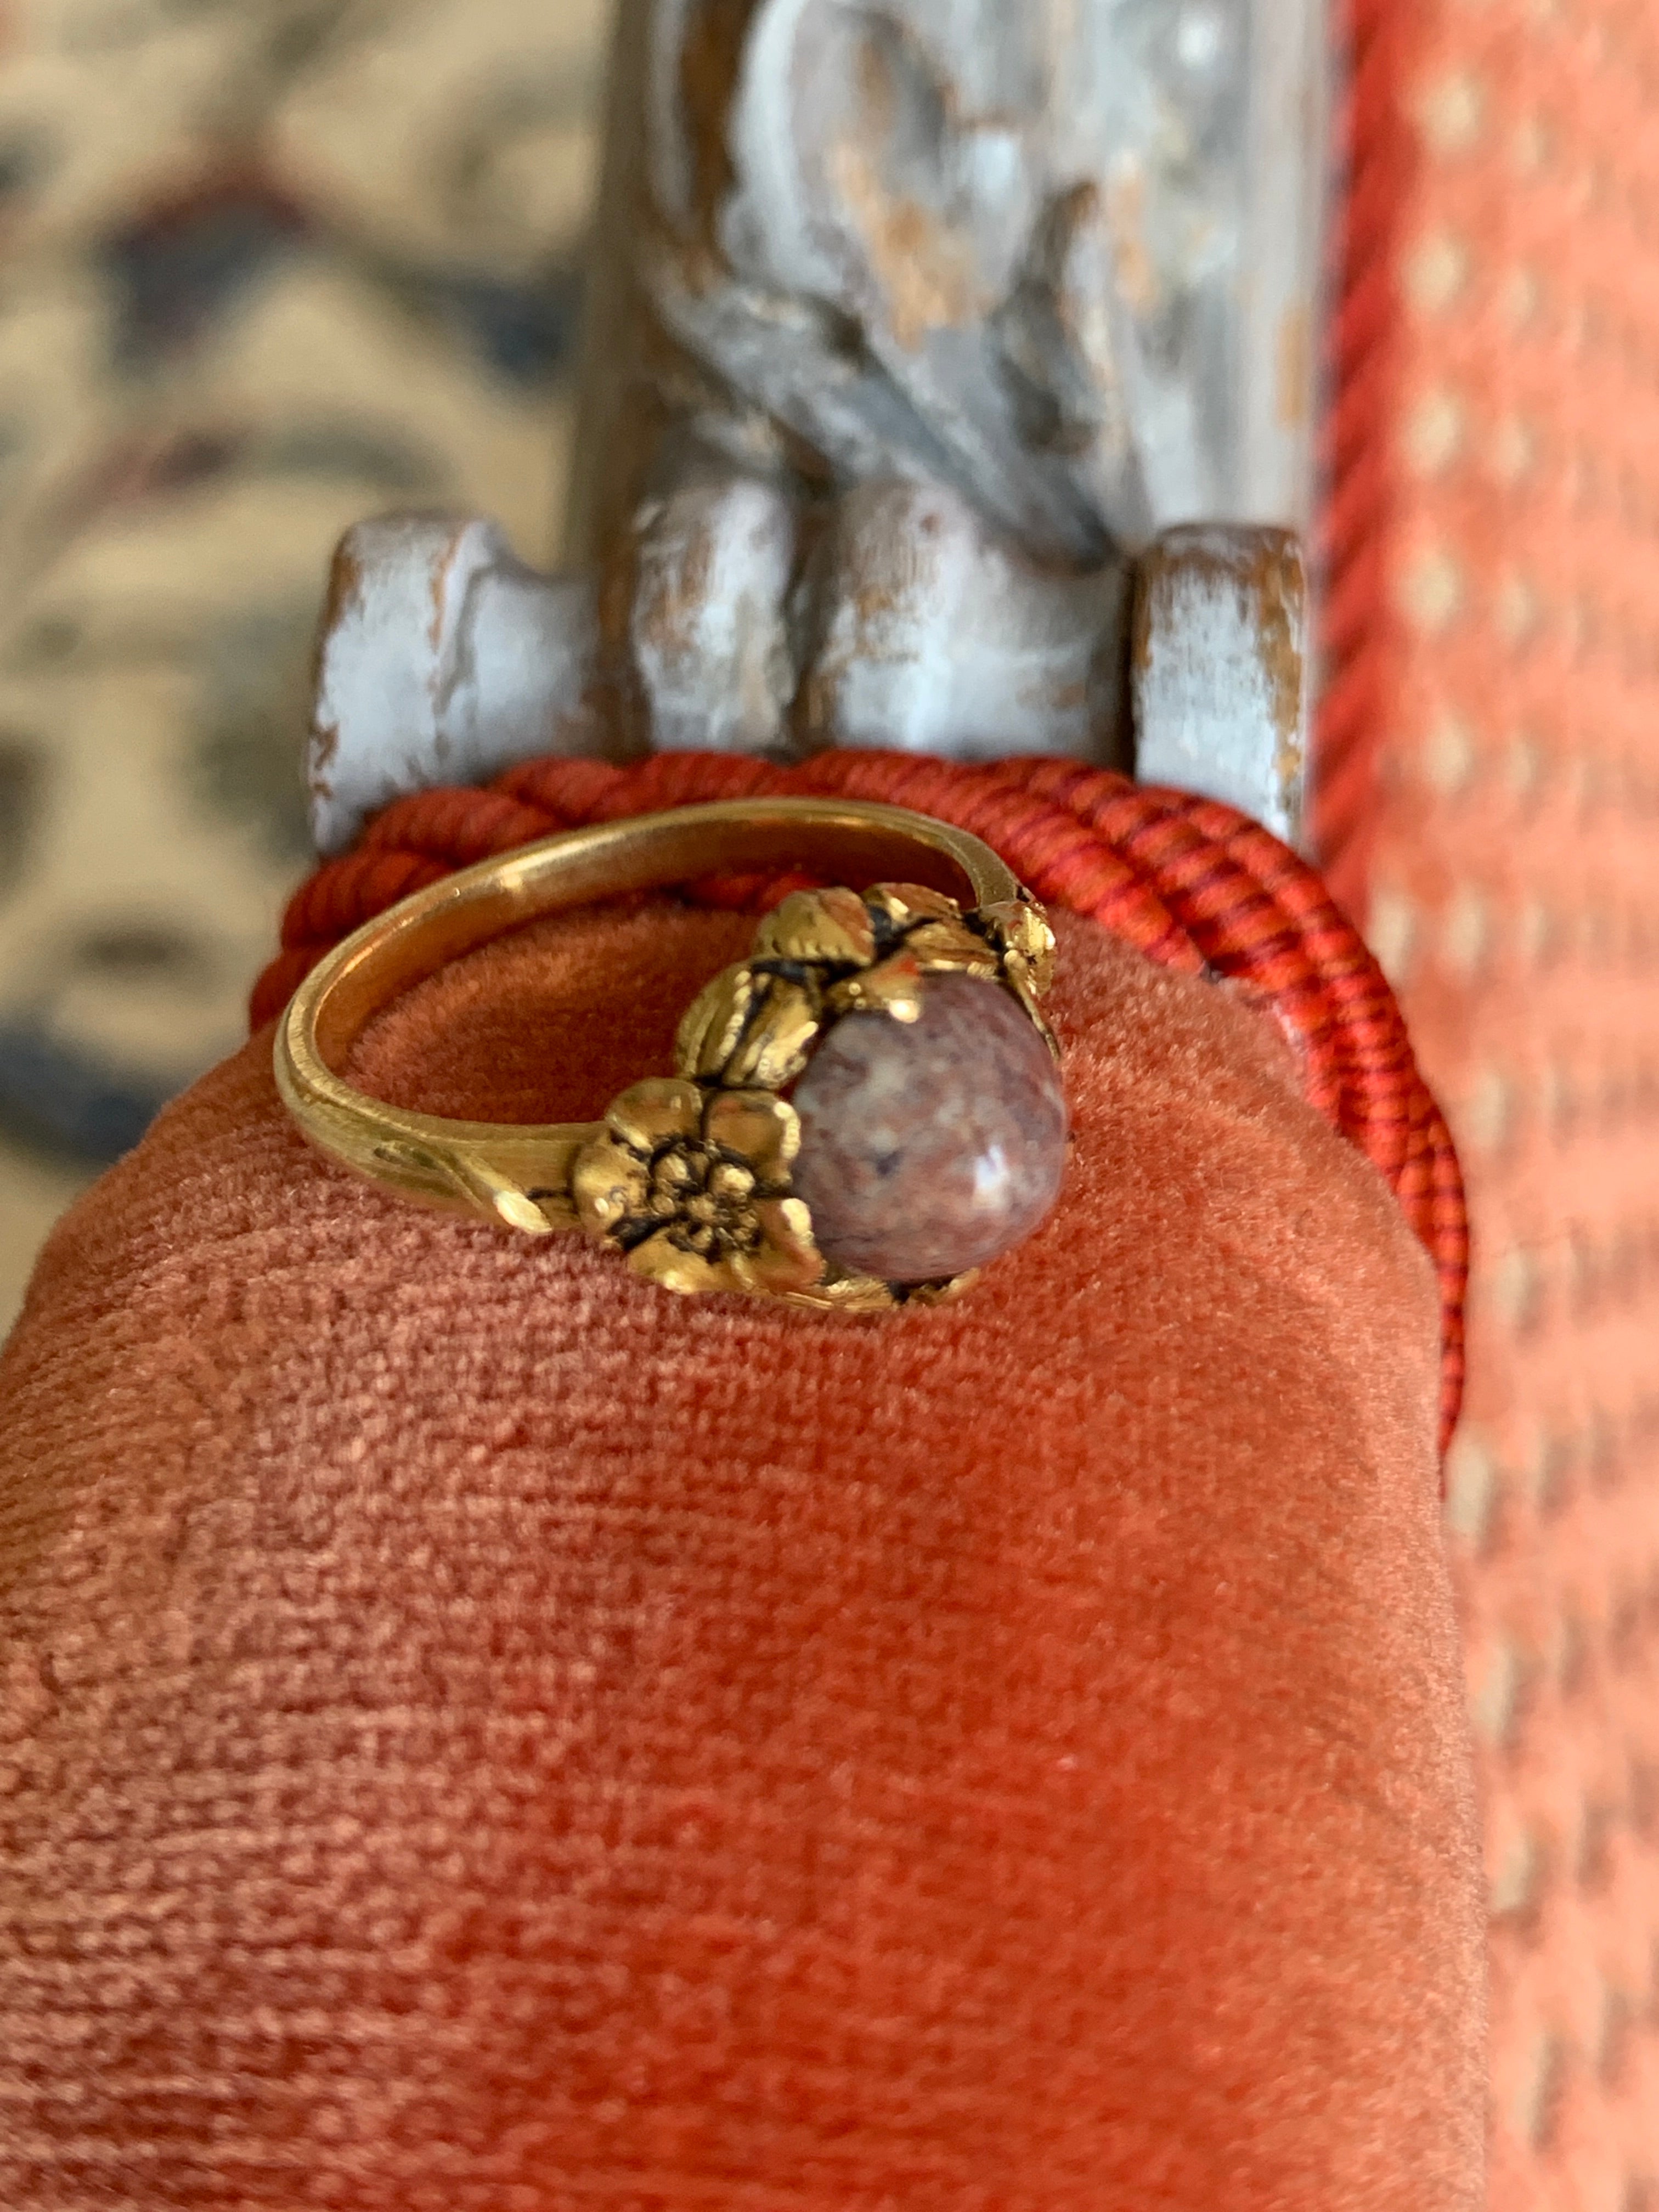 French ring in yellow gold decorated with flowers and leaves that cradle a violet agate in this organic Art Nouveau look. Lovely piece of jewellery in very good condition.
Size 53
4.3 gr.